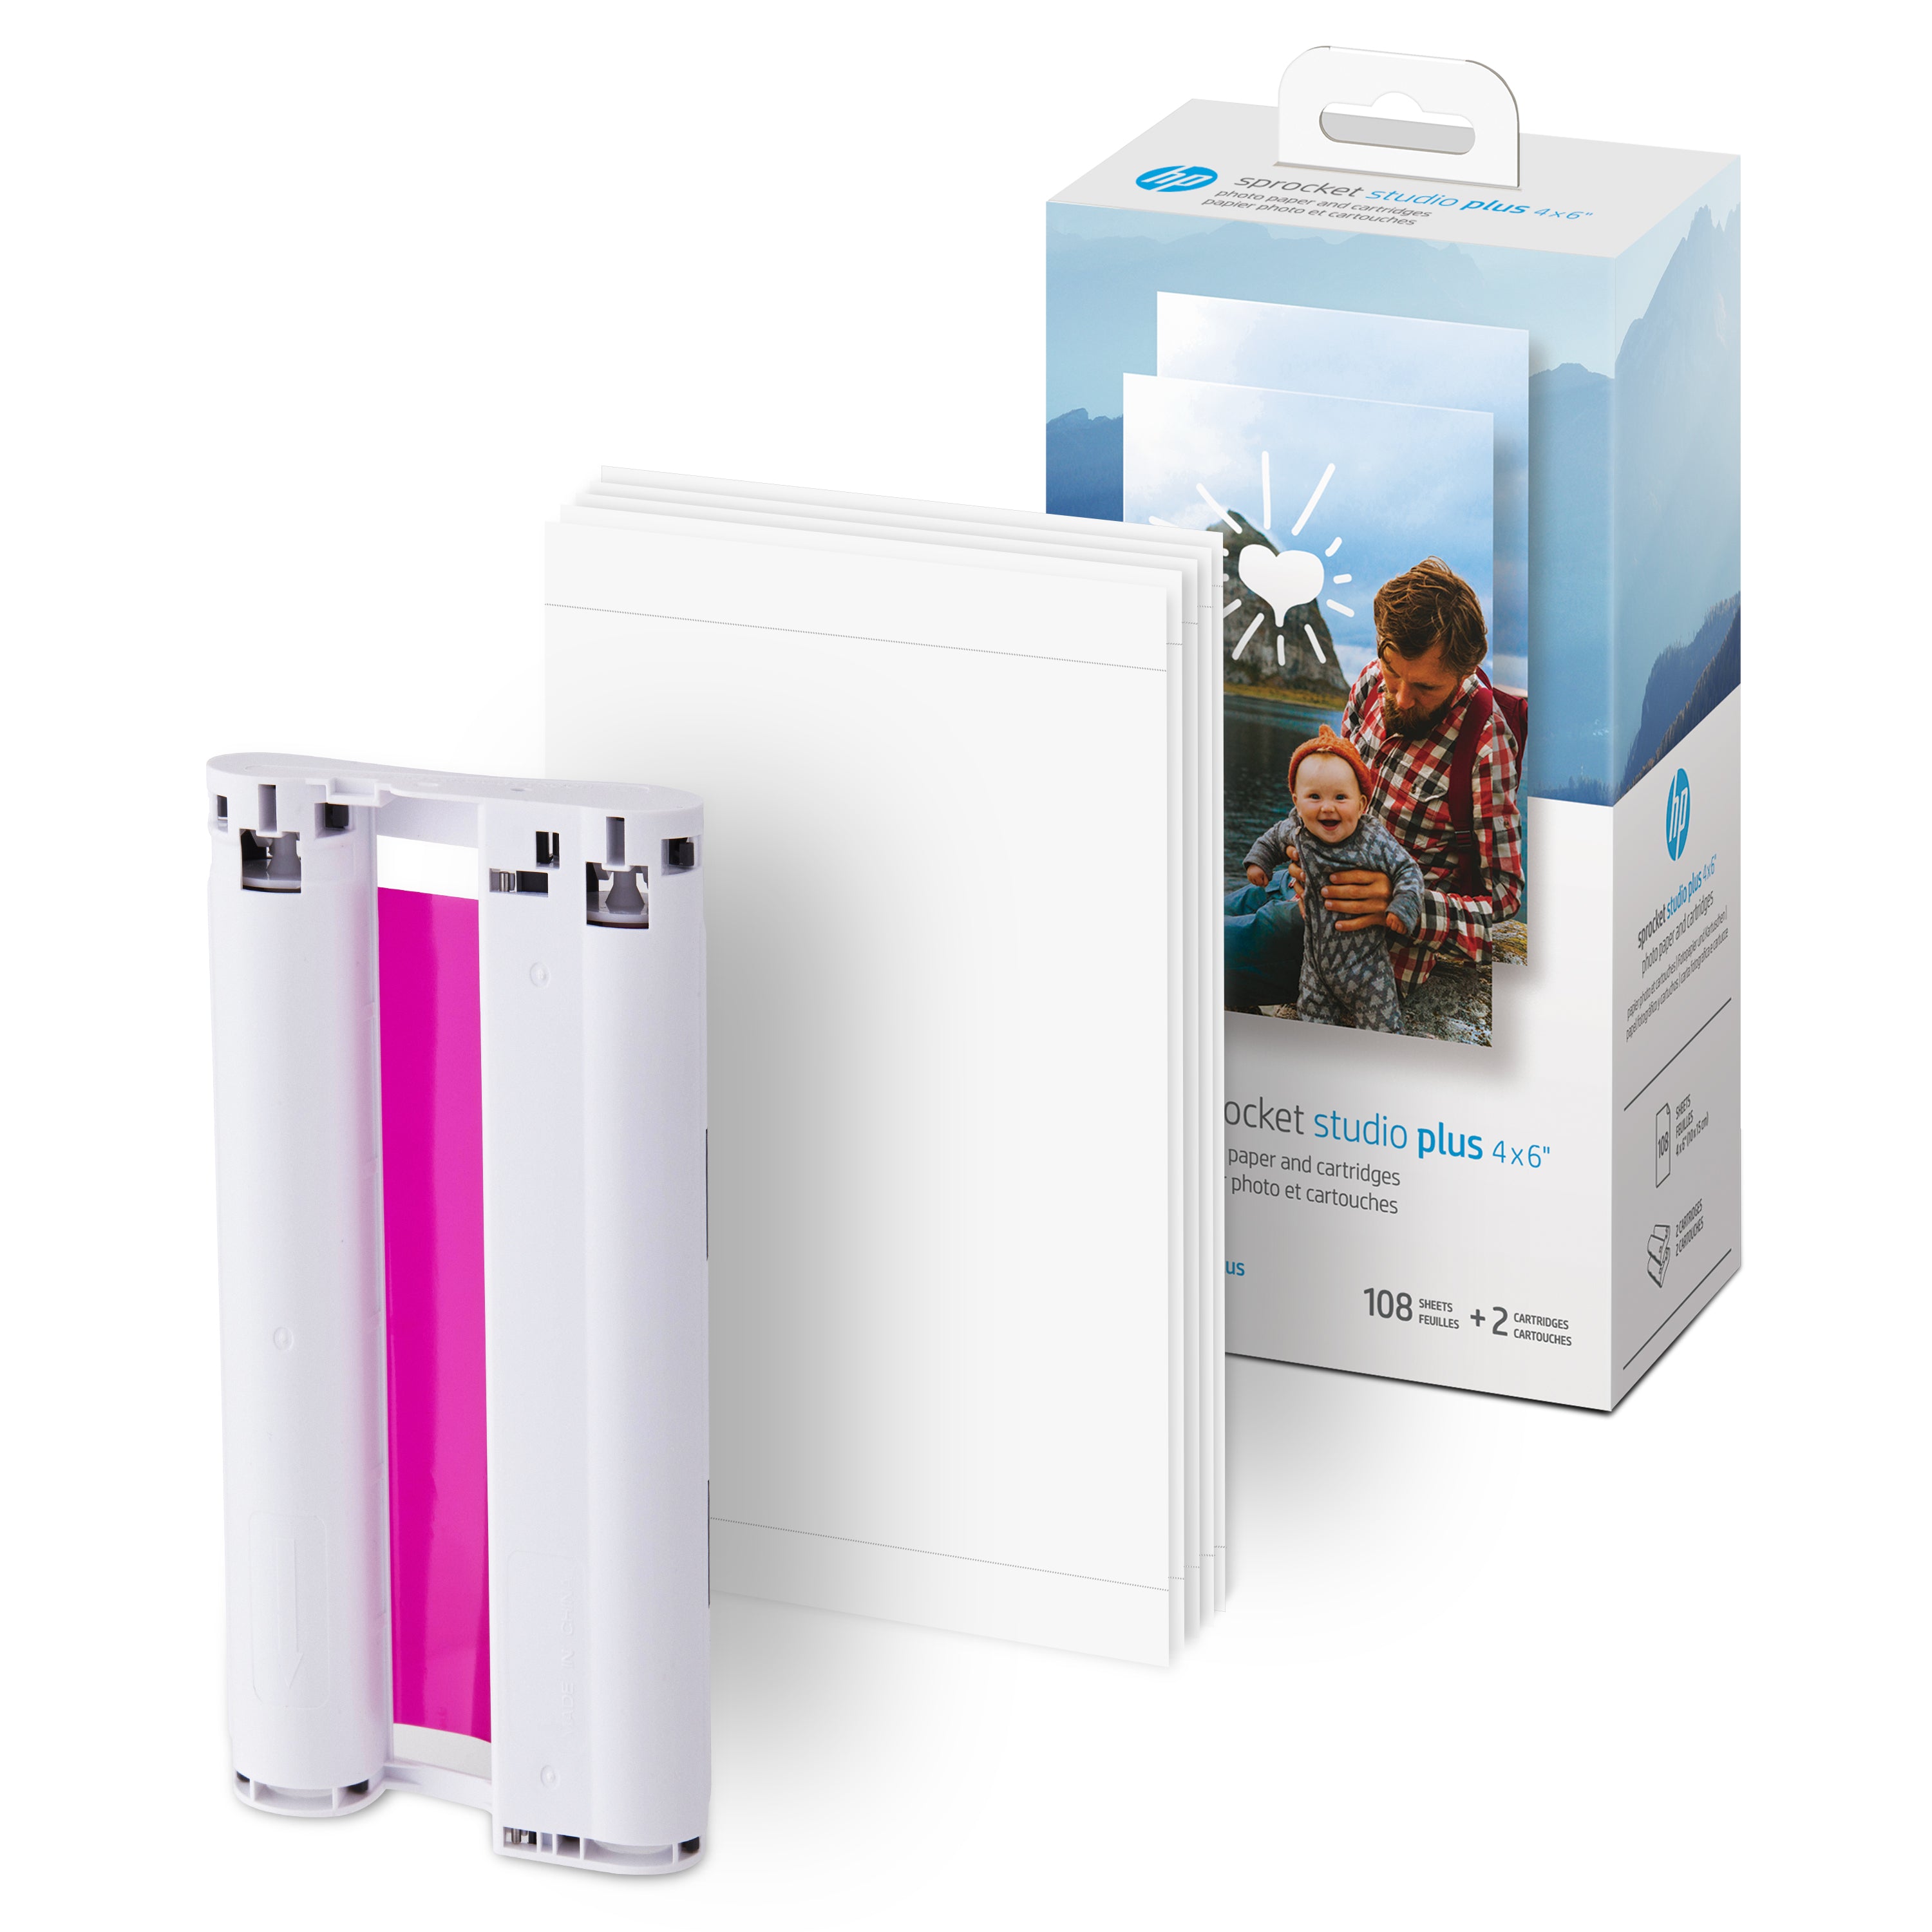 HP Sprocket Studio Plus 4 x 6” Photo Paper and Cartridges (Includes 324 Sheets and 6 Cartridges)